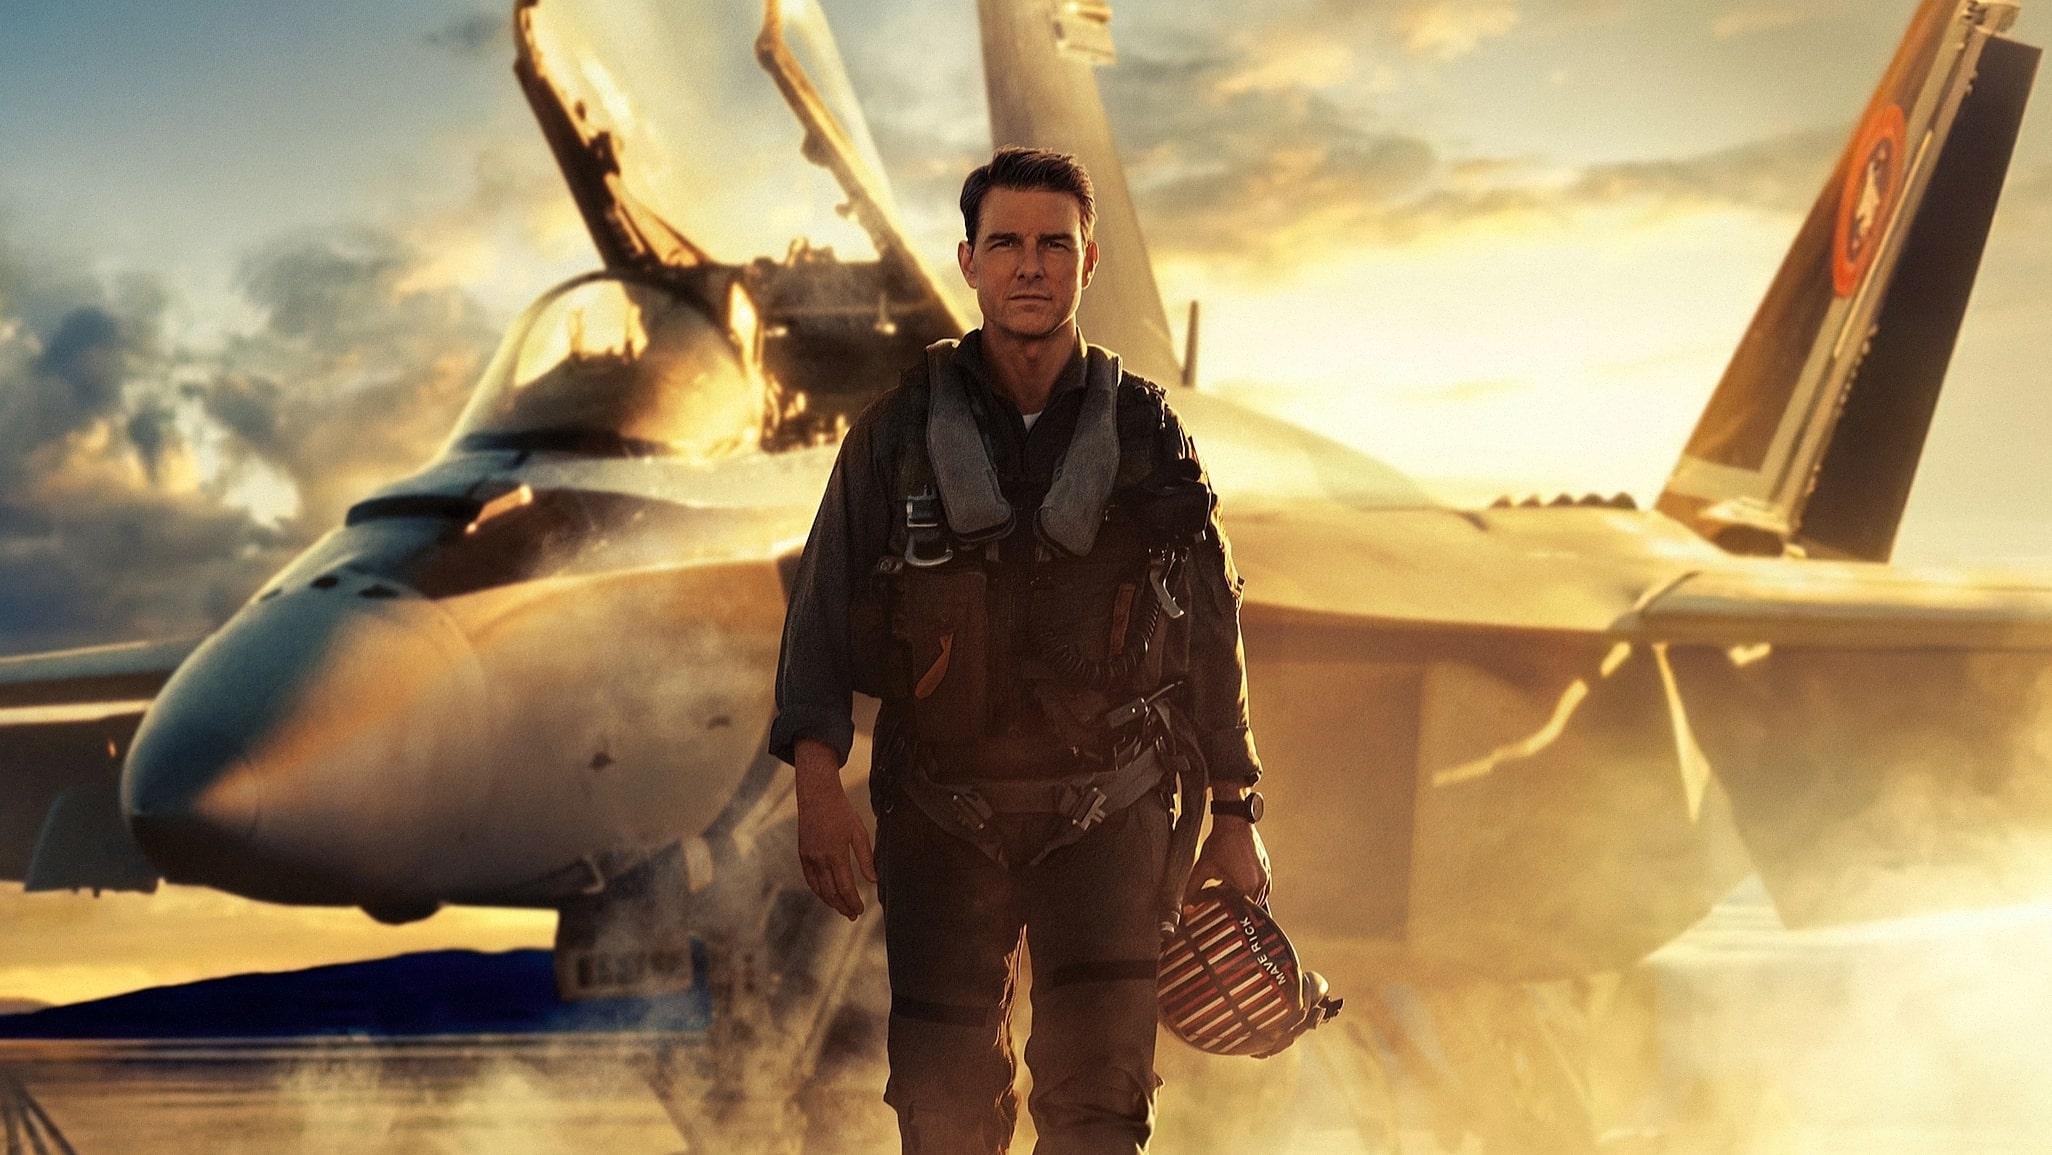 Tom Cruise standing in front of a plane in a still from Top Gun: Maverick